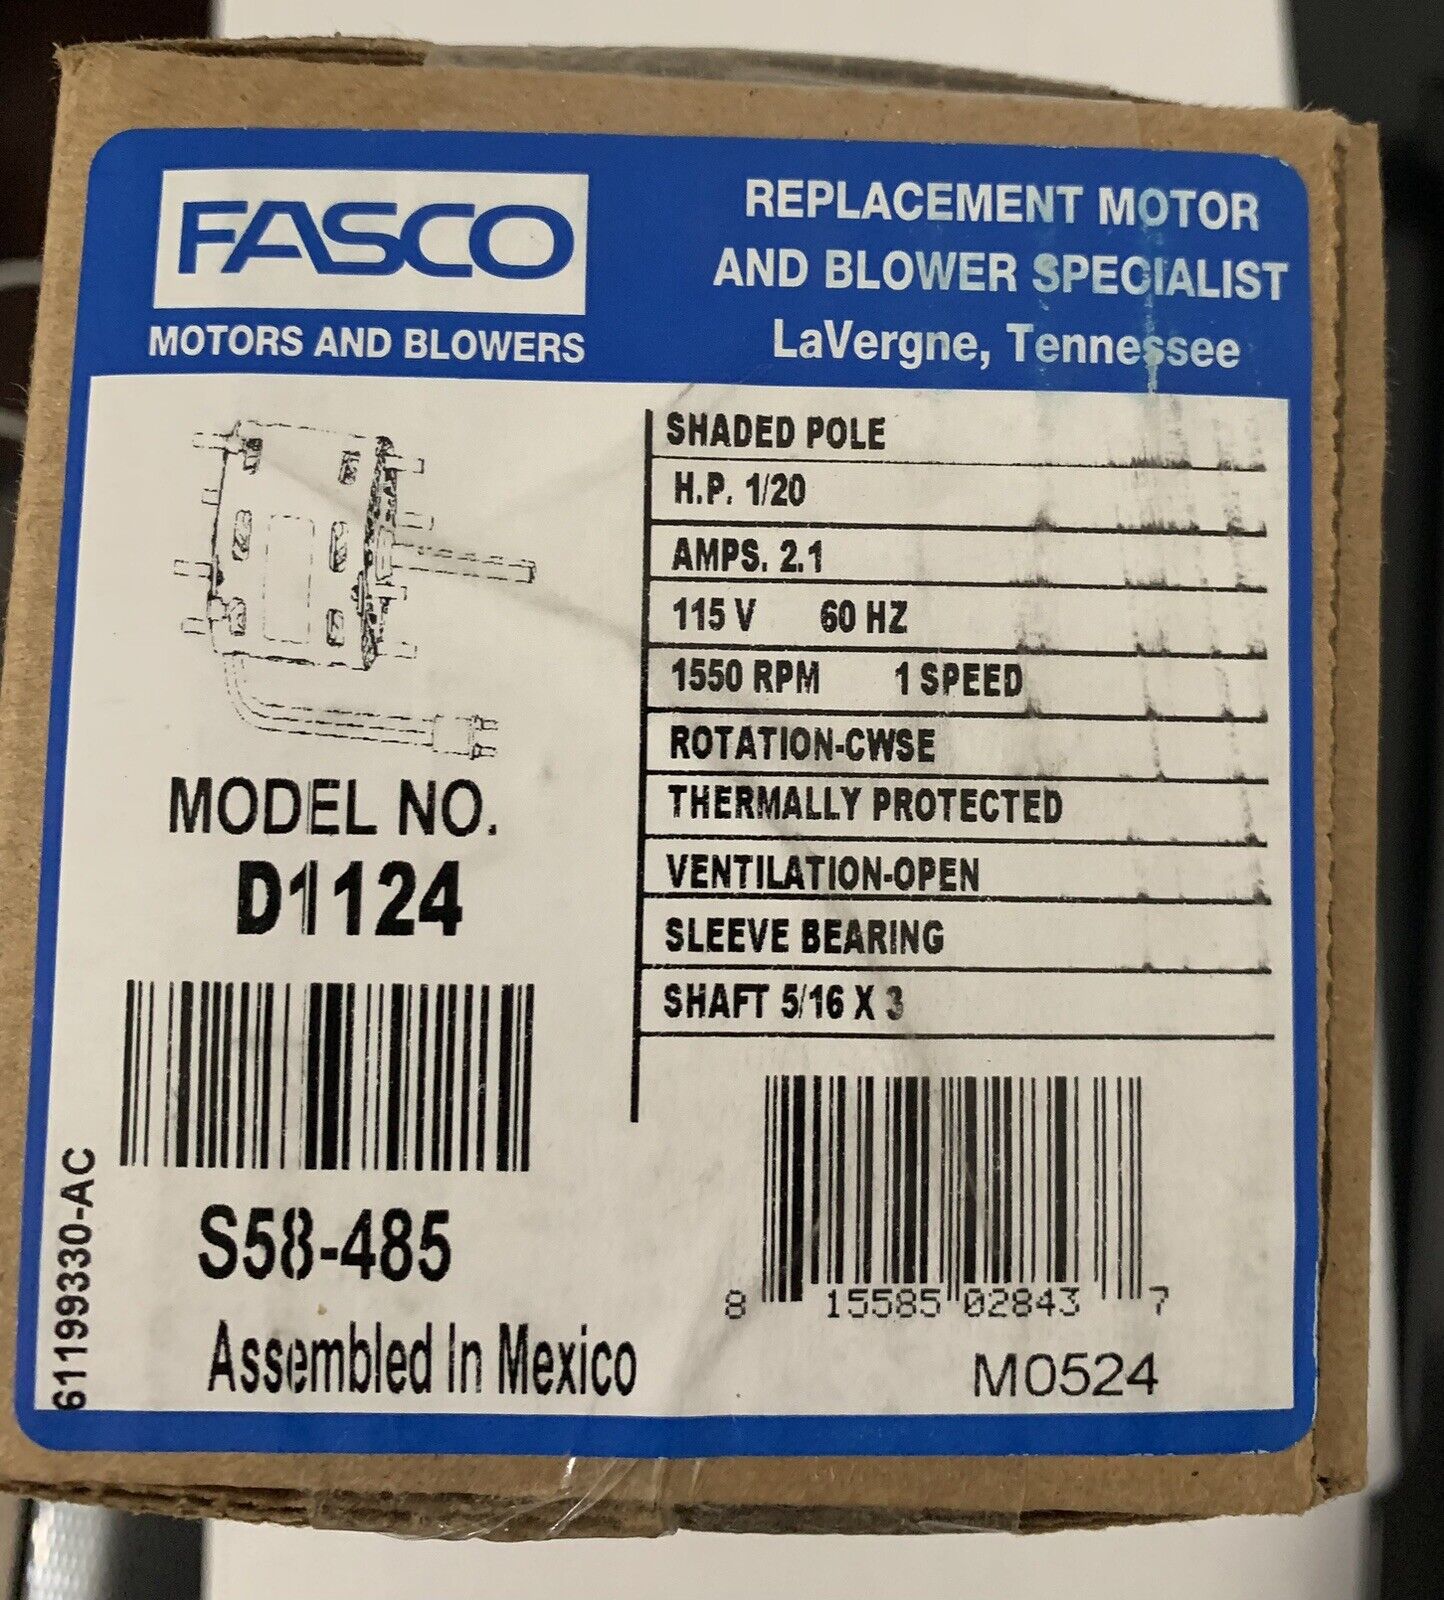 Fasco D1124 3.3-Inch 115 Volts 1550 RPM Shaded Pole Motor